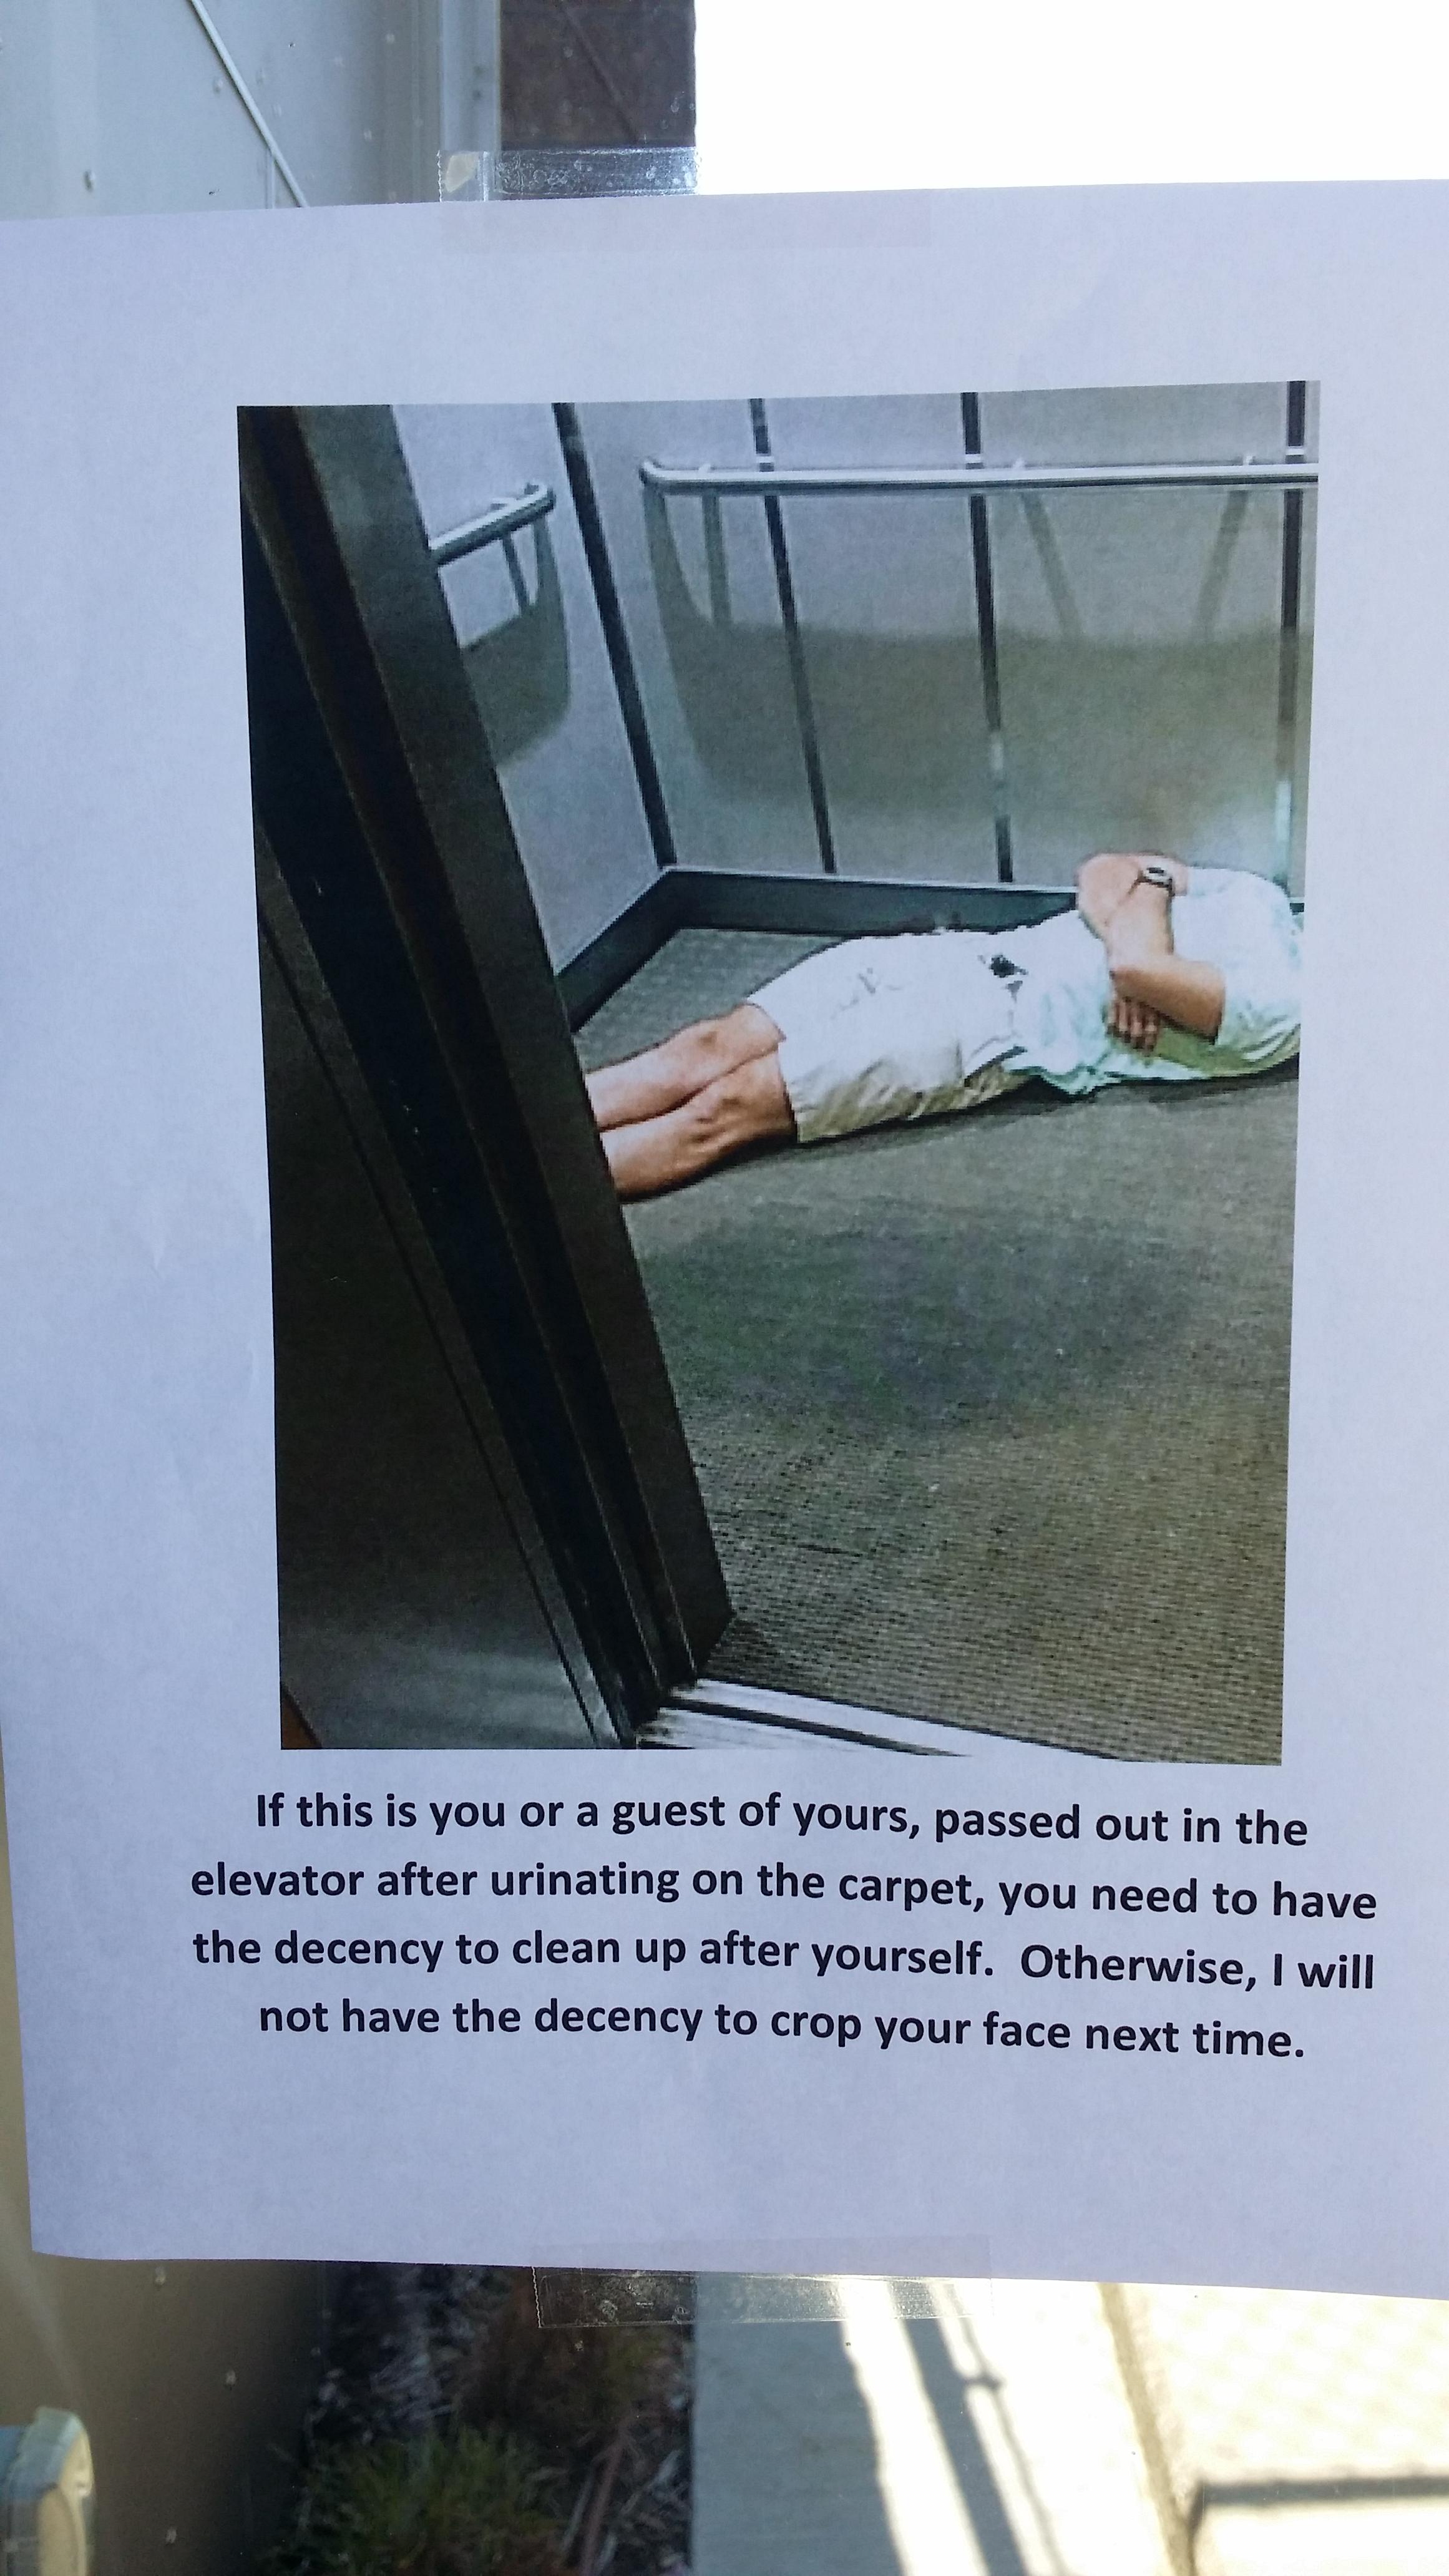 pee pants in elevator - If this is you or a guest of yours, passed out in the elevator after urinating on the carpet, you need to have the decency to clean up after yourself. Otherwise, I will not have the decency to crop your face next time.